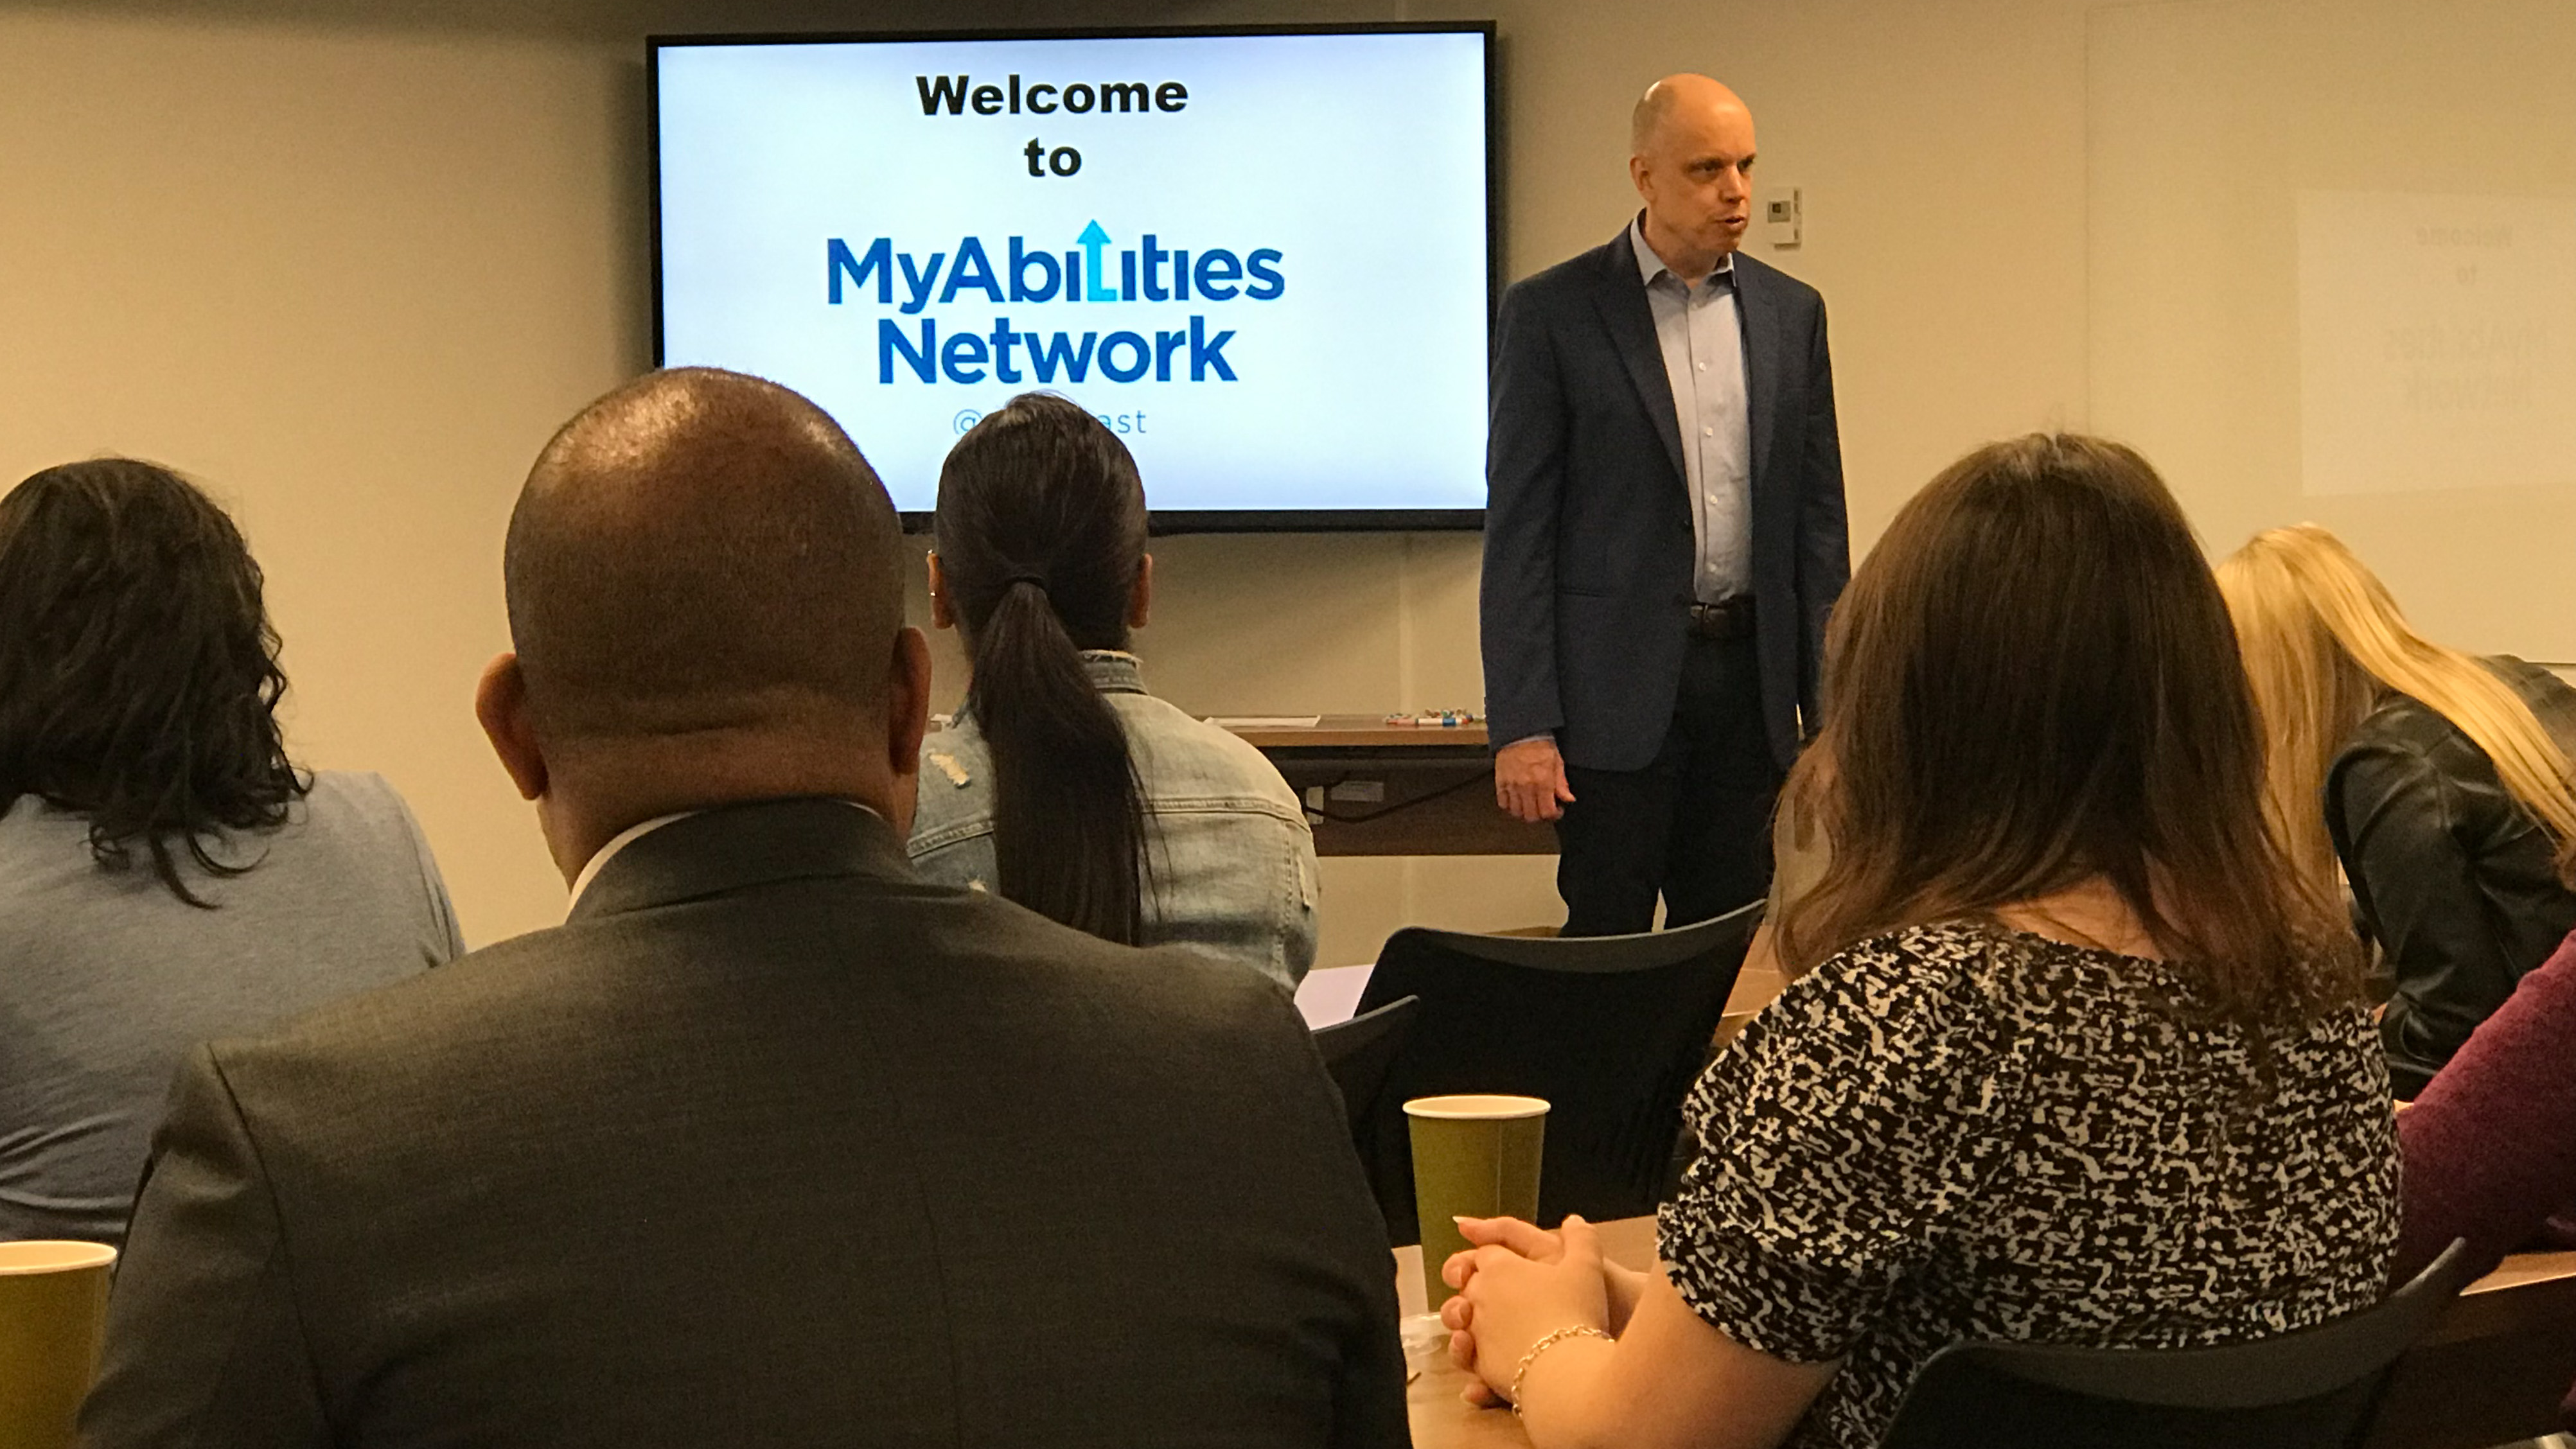 Tom Wlodowski speaking in front of a group of employoees with MyAbilities Network logo on a screen behind him